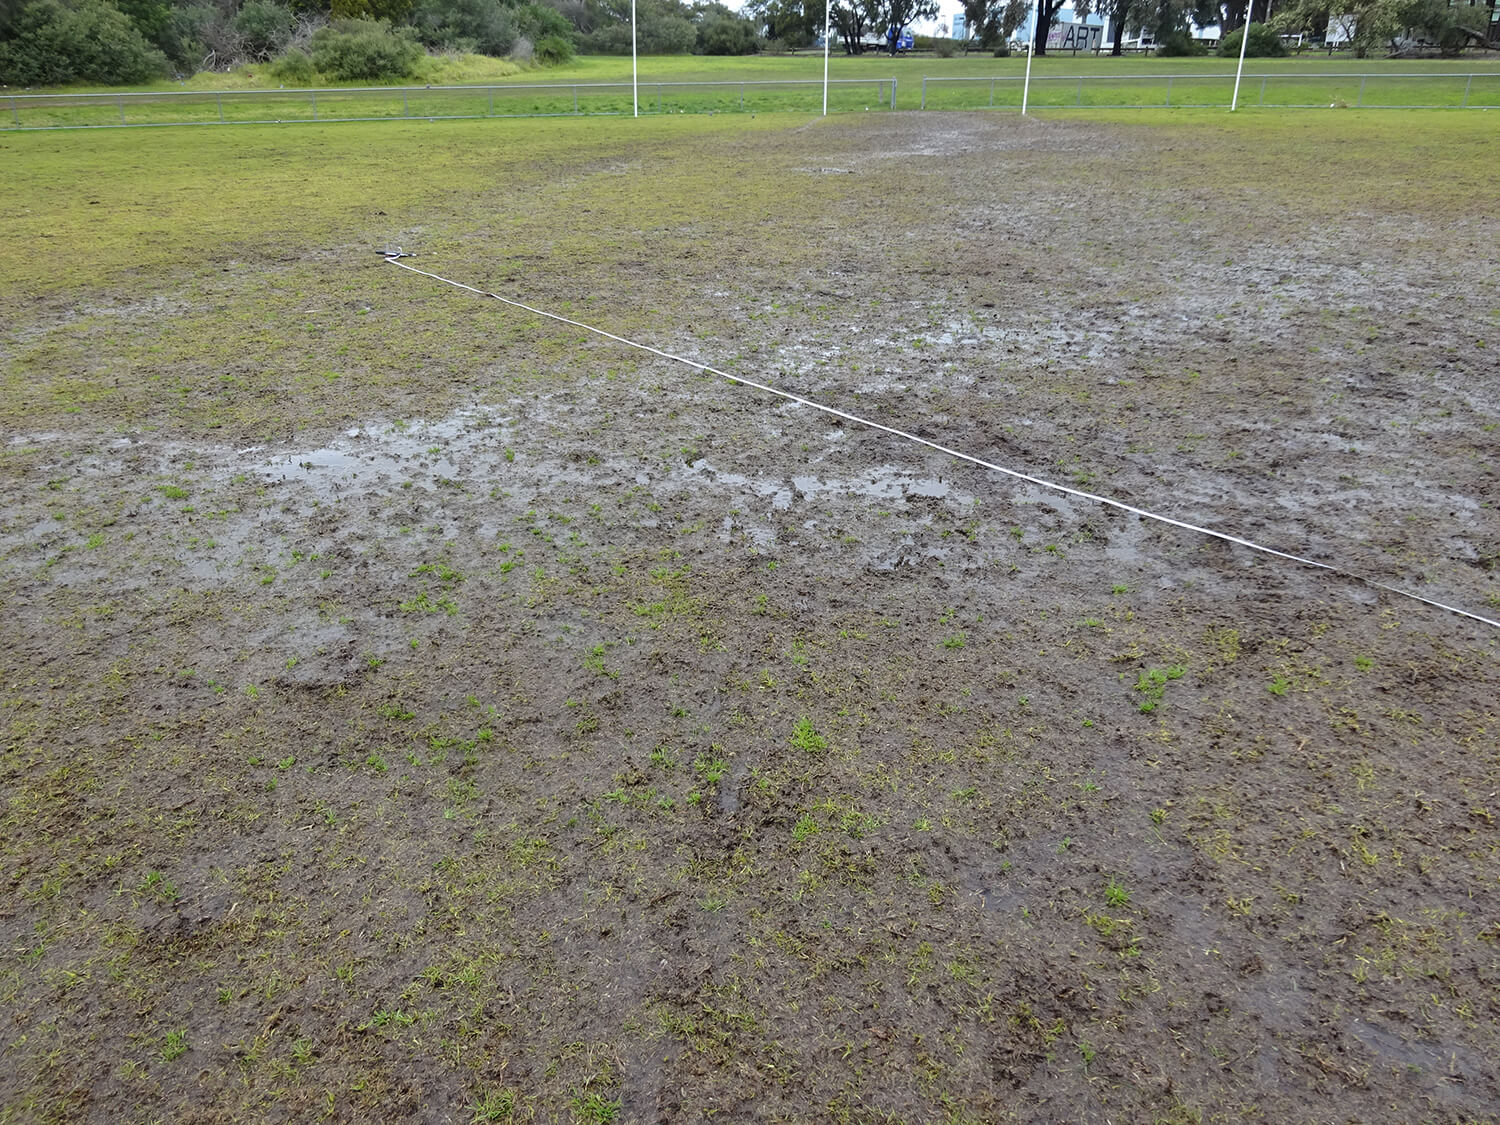 Damaged natural turf Field of Play during the winter season